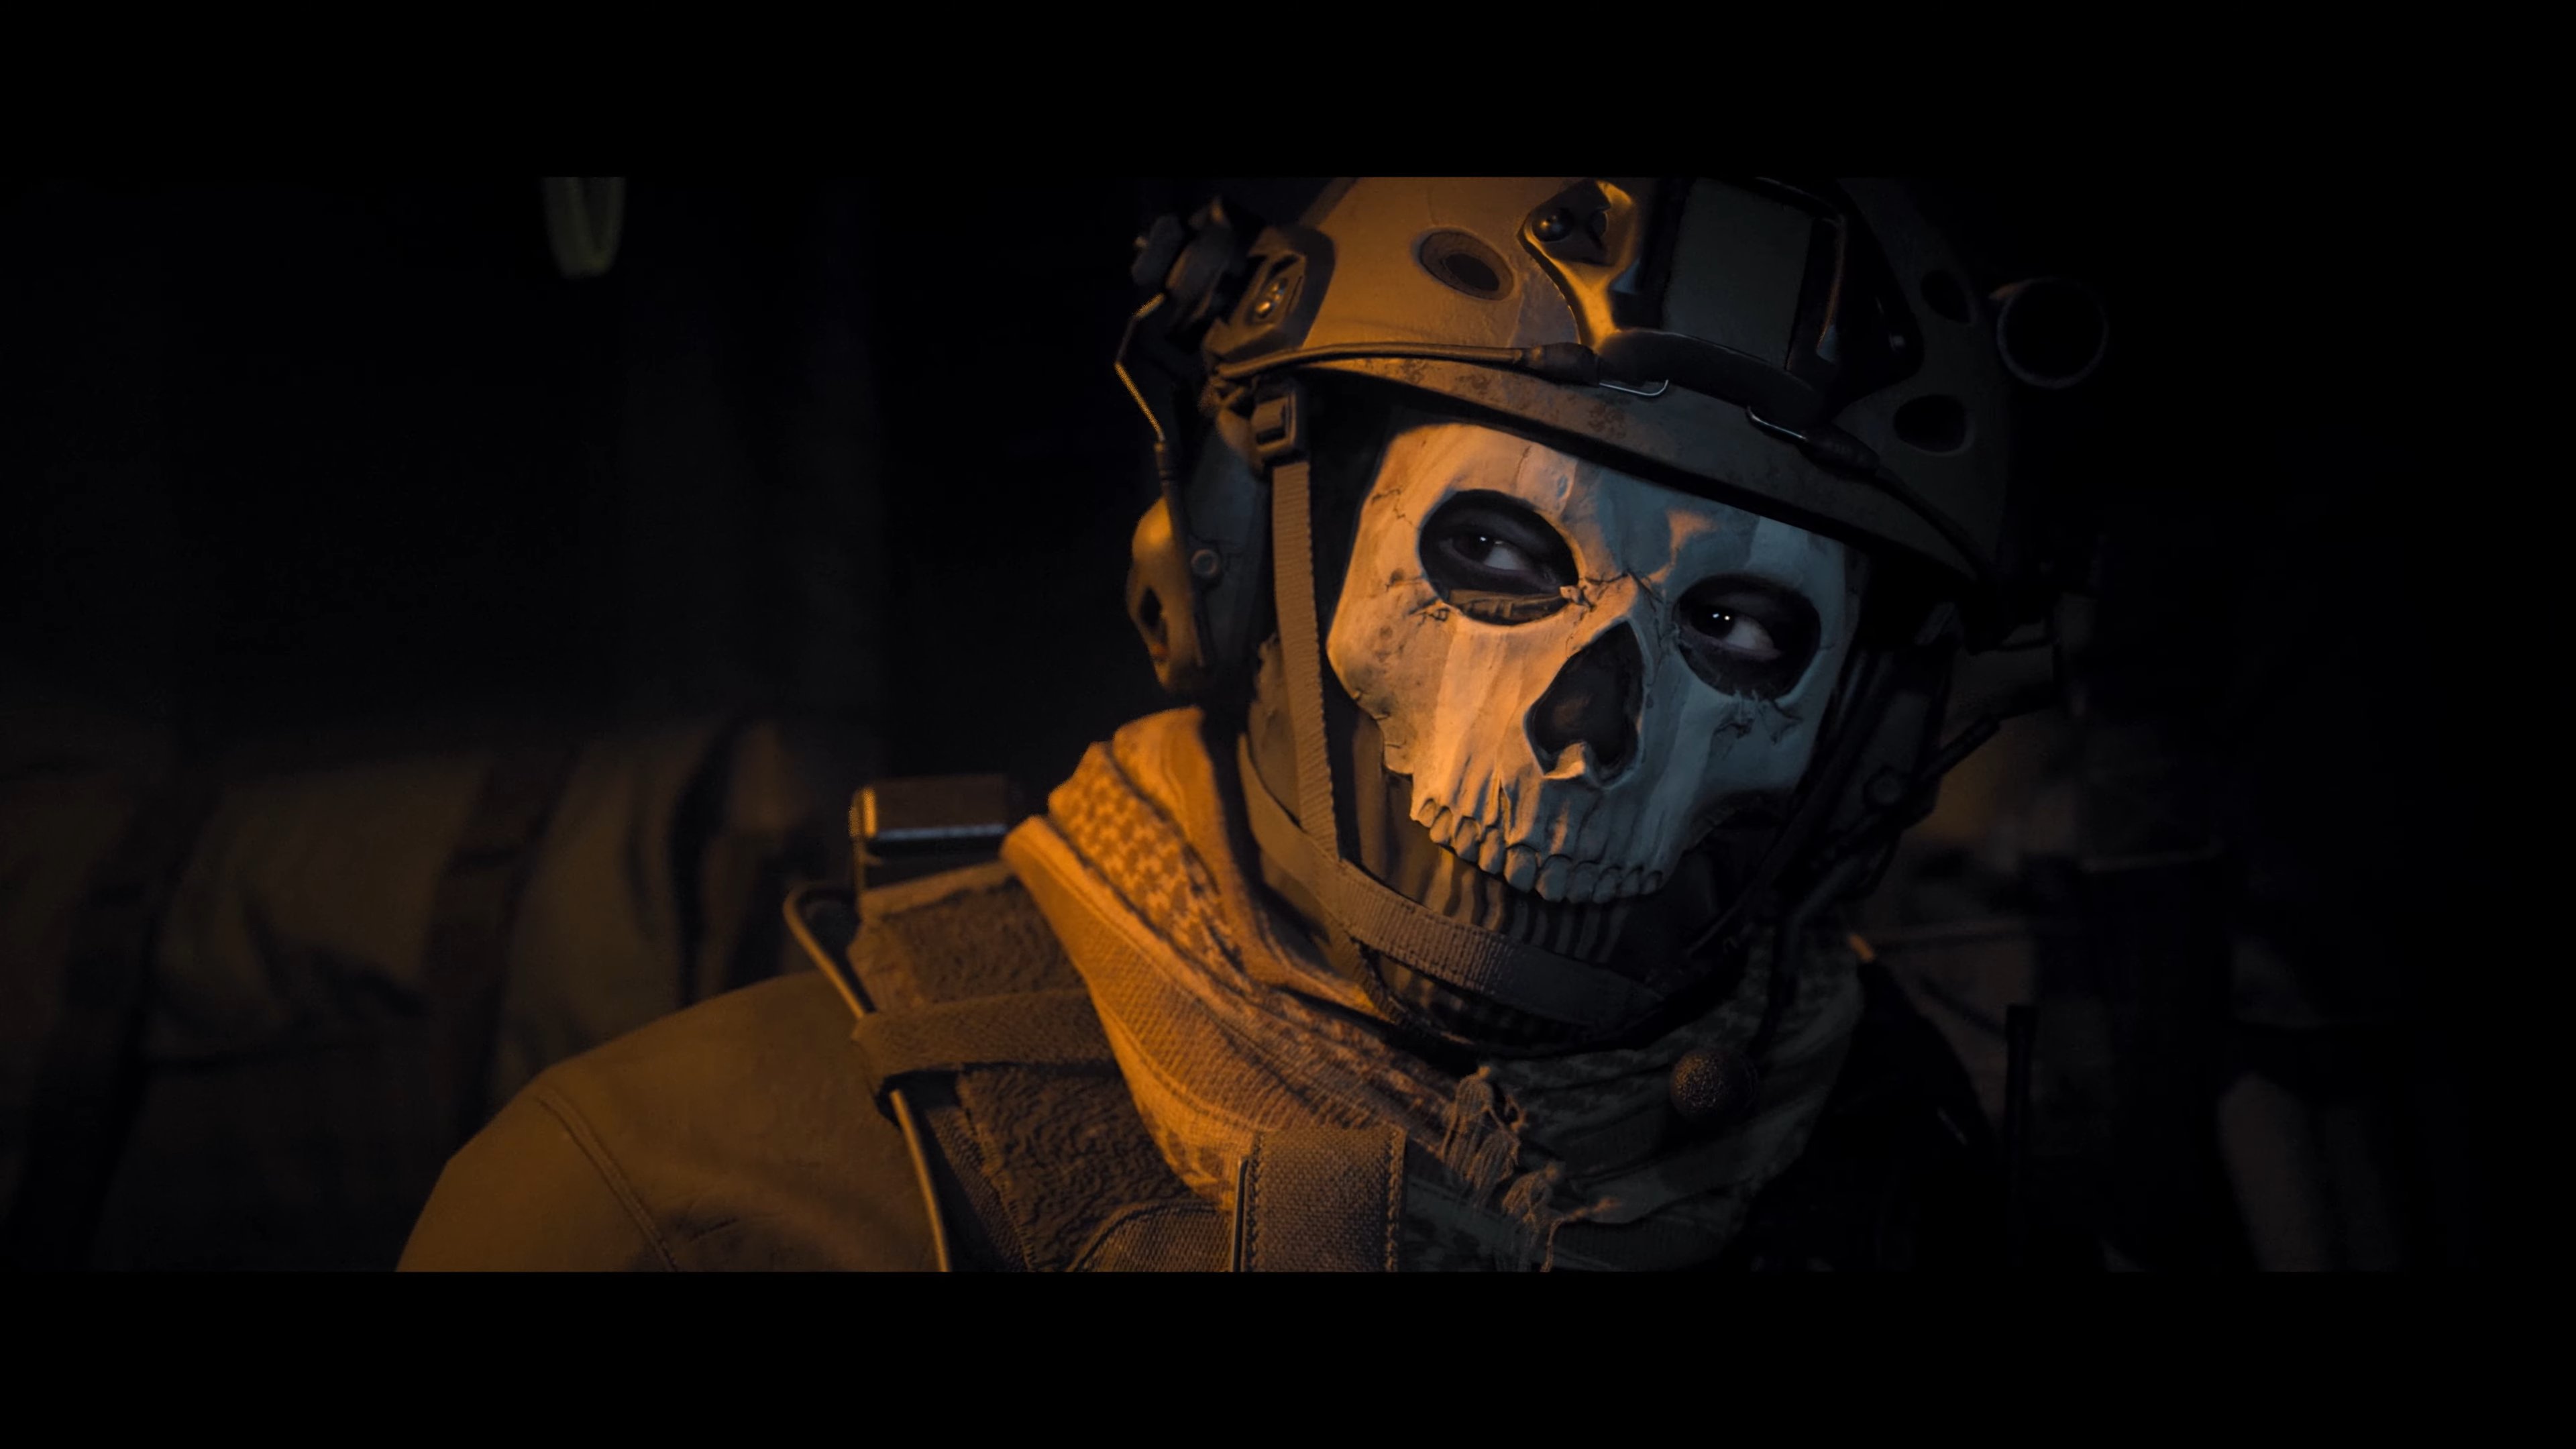 Call of Duty: Ghosts Benchmarked -  Reviews